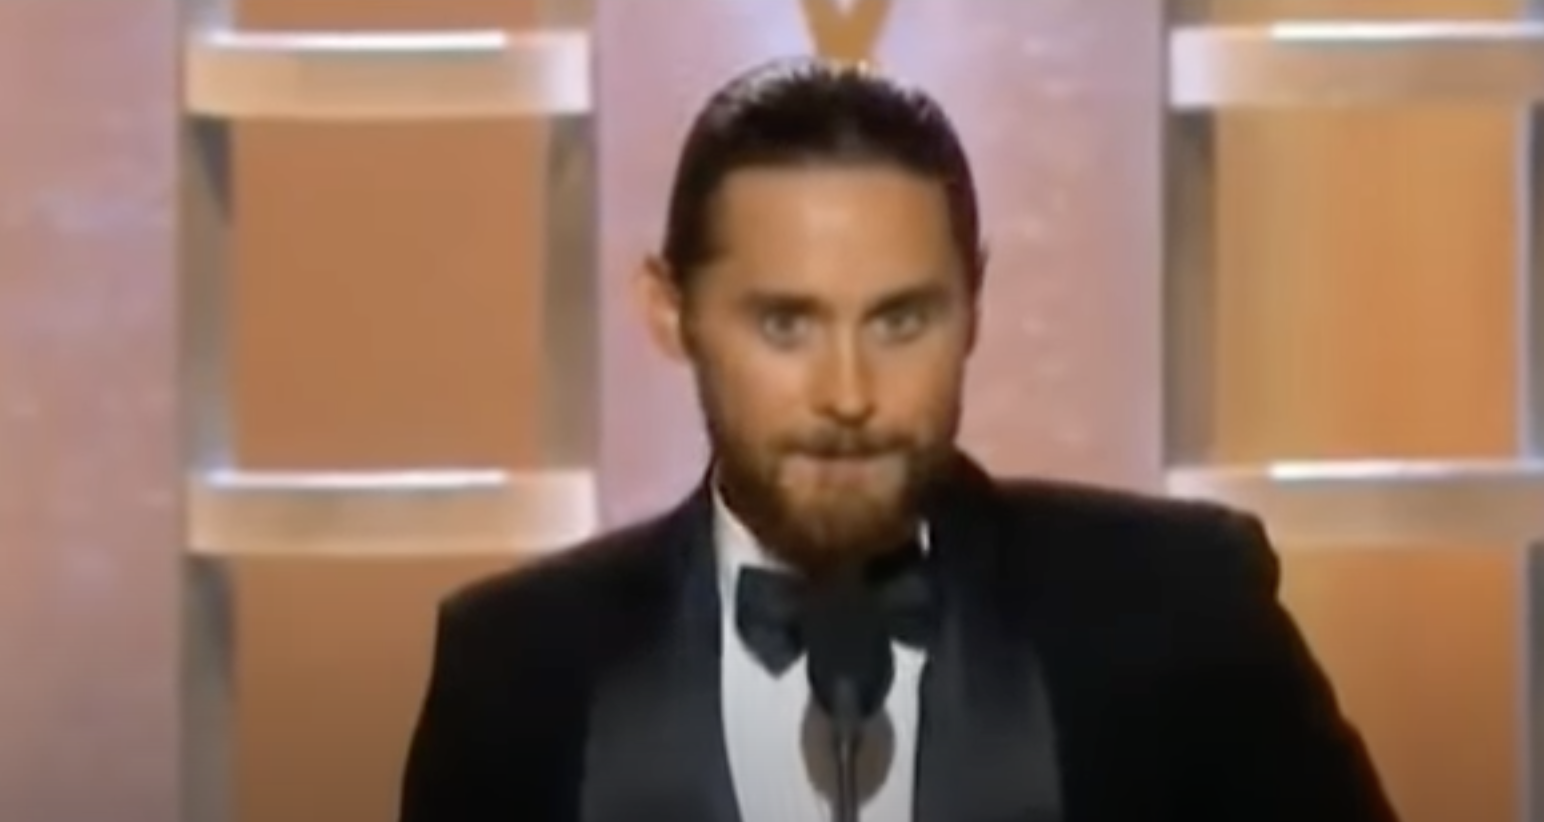 Jared Leto in a bow tie at the podium